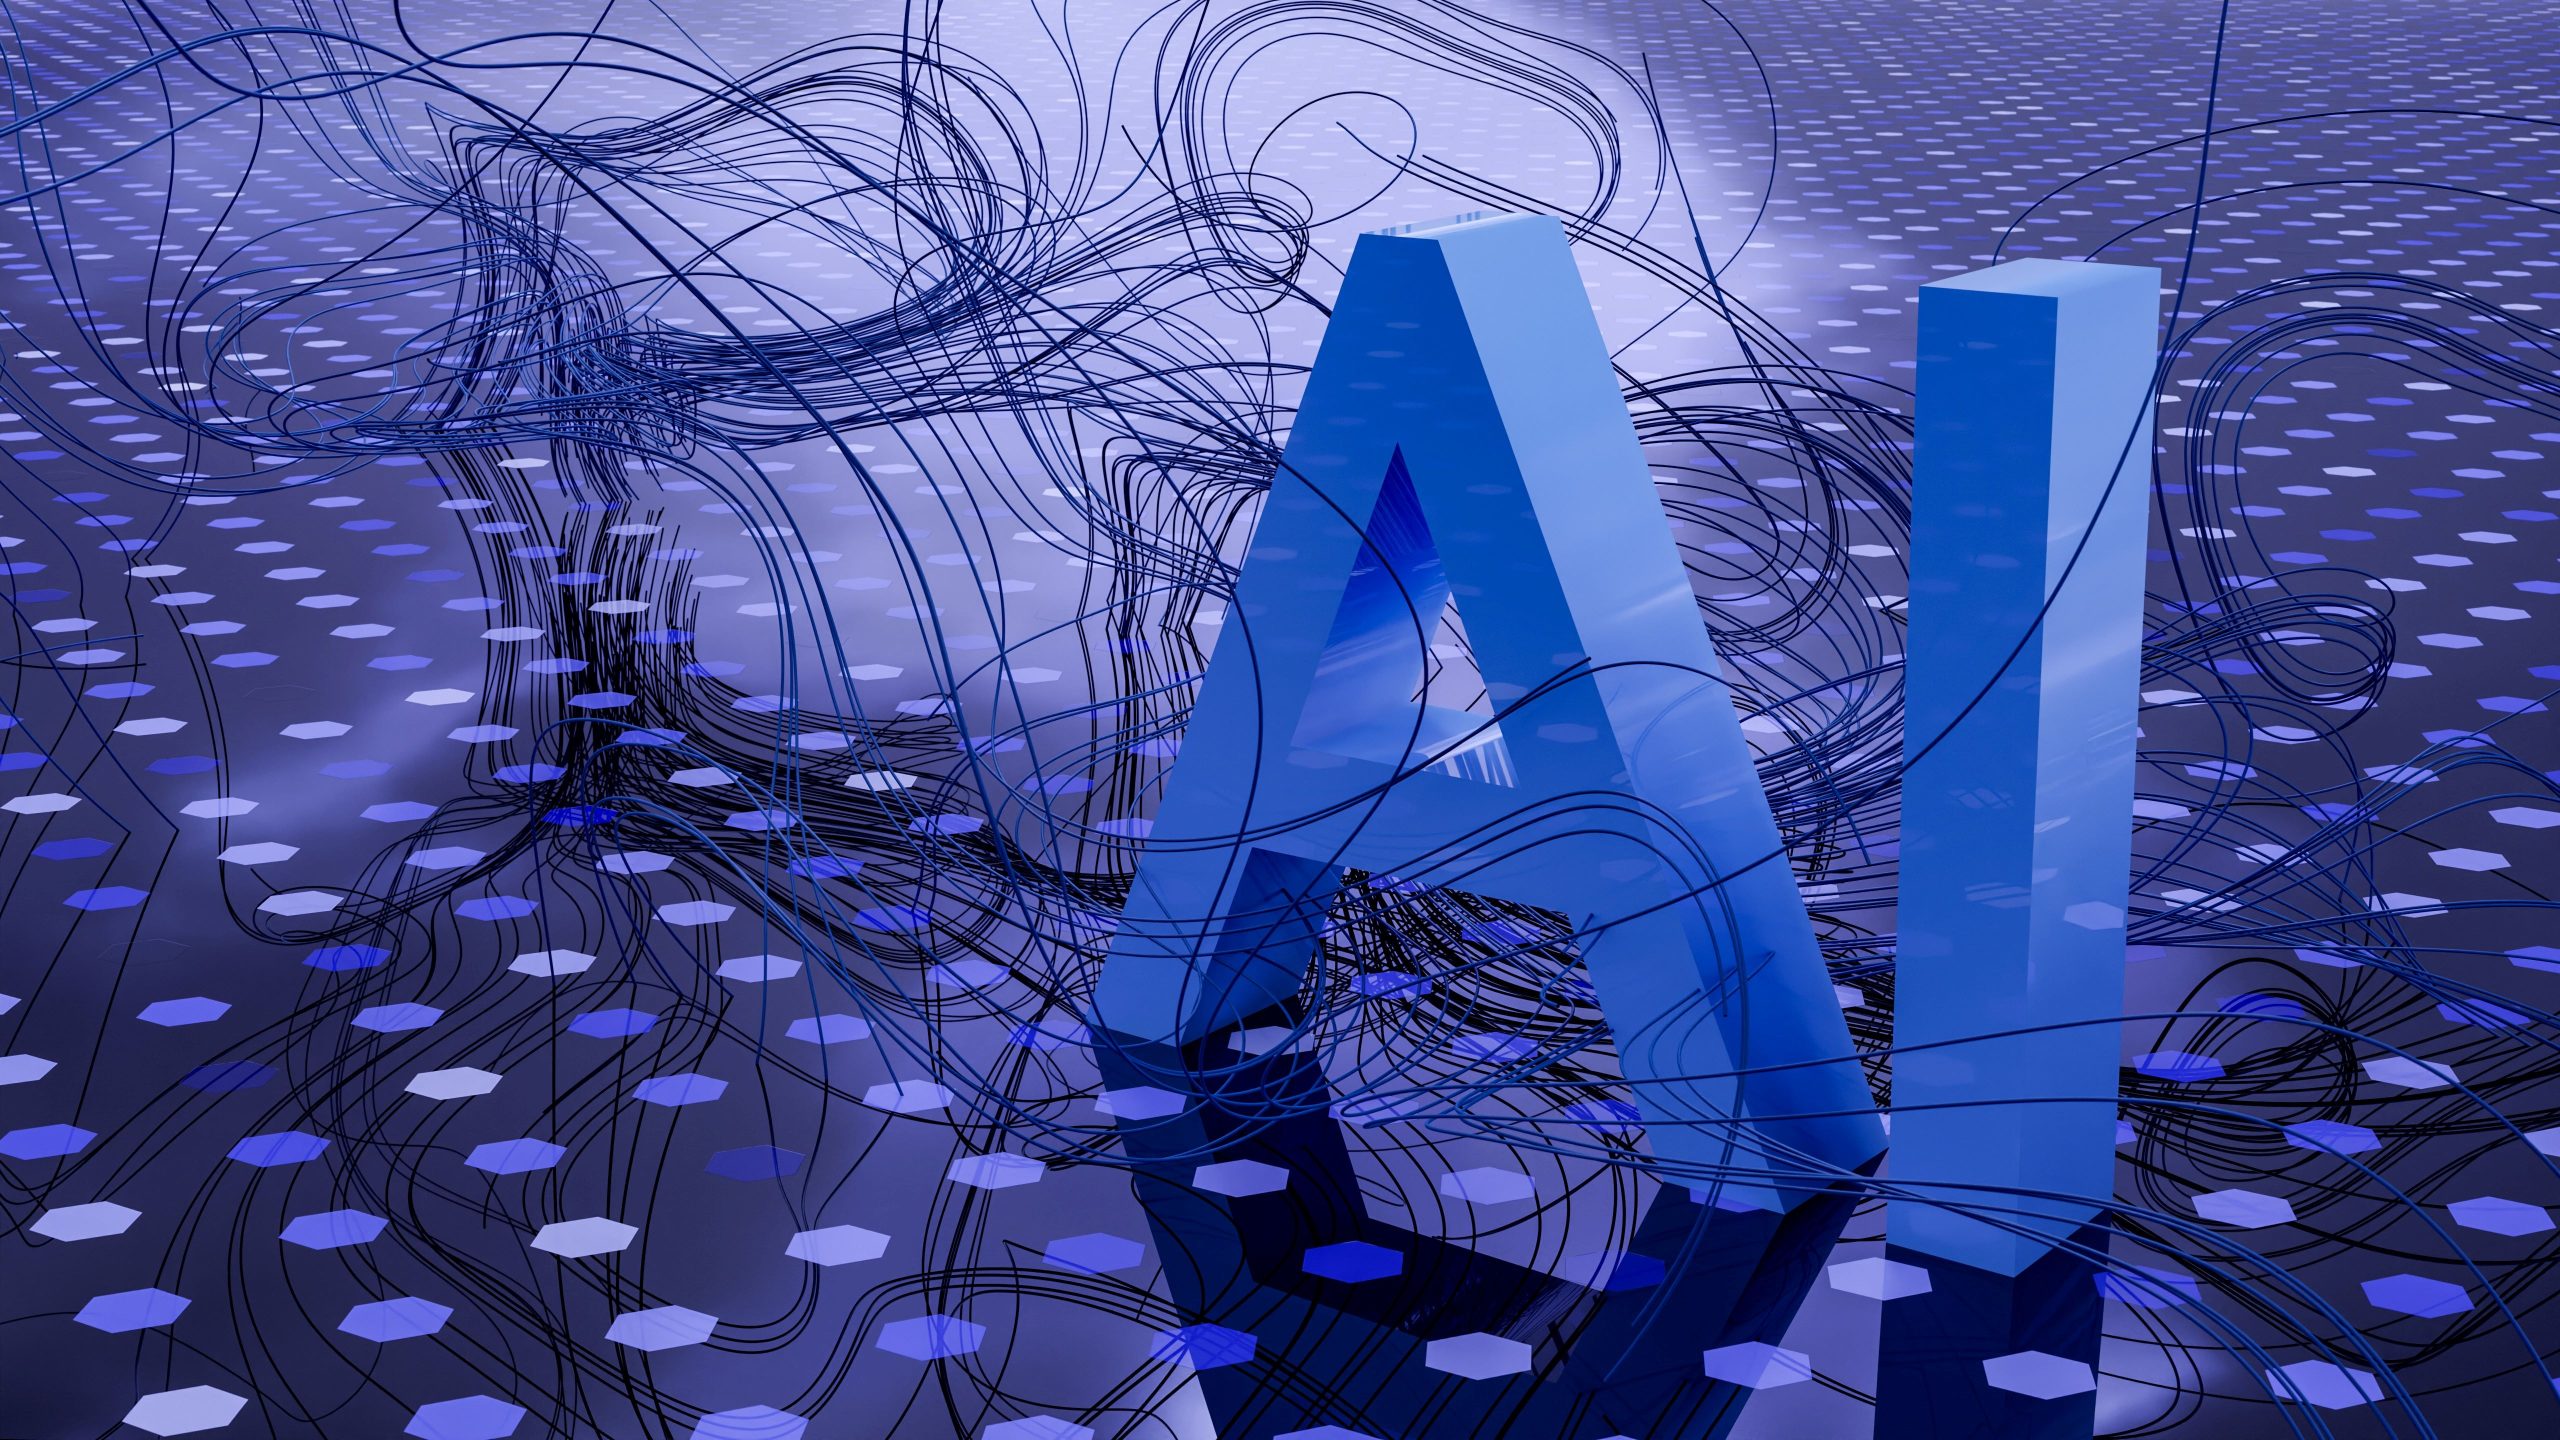 The acronym 'AI' appearing in blue letters against a purple-blue background.